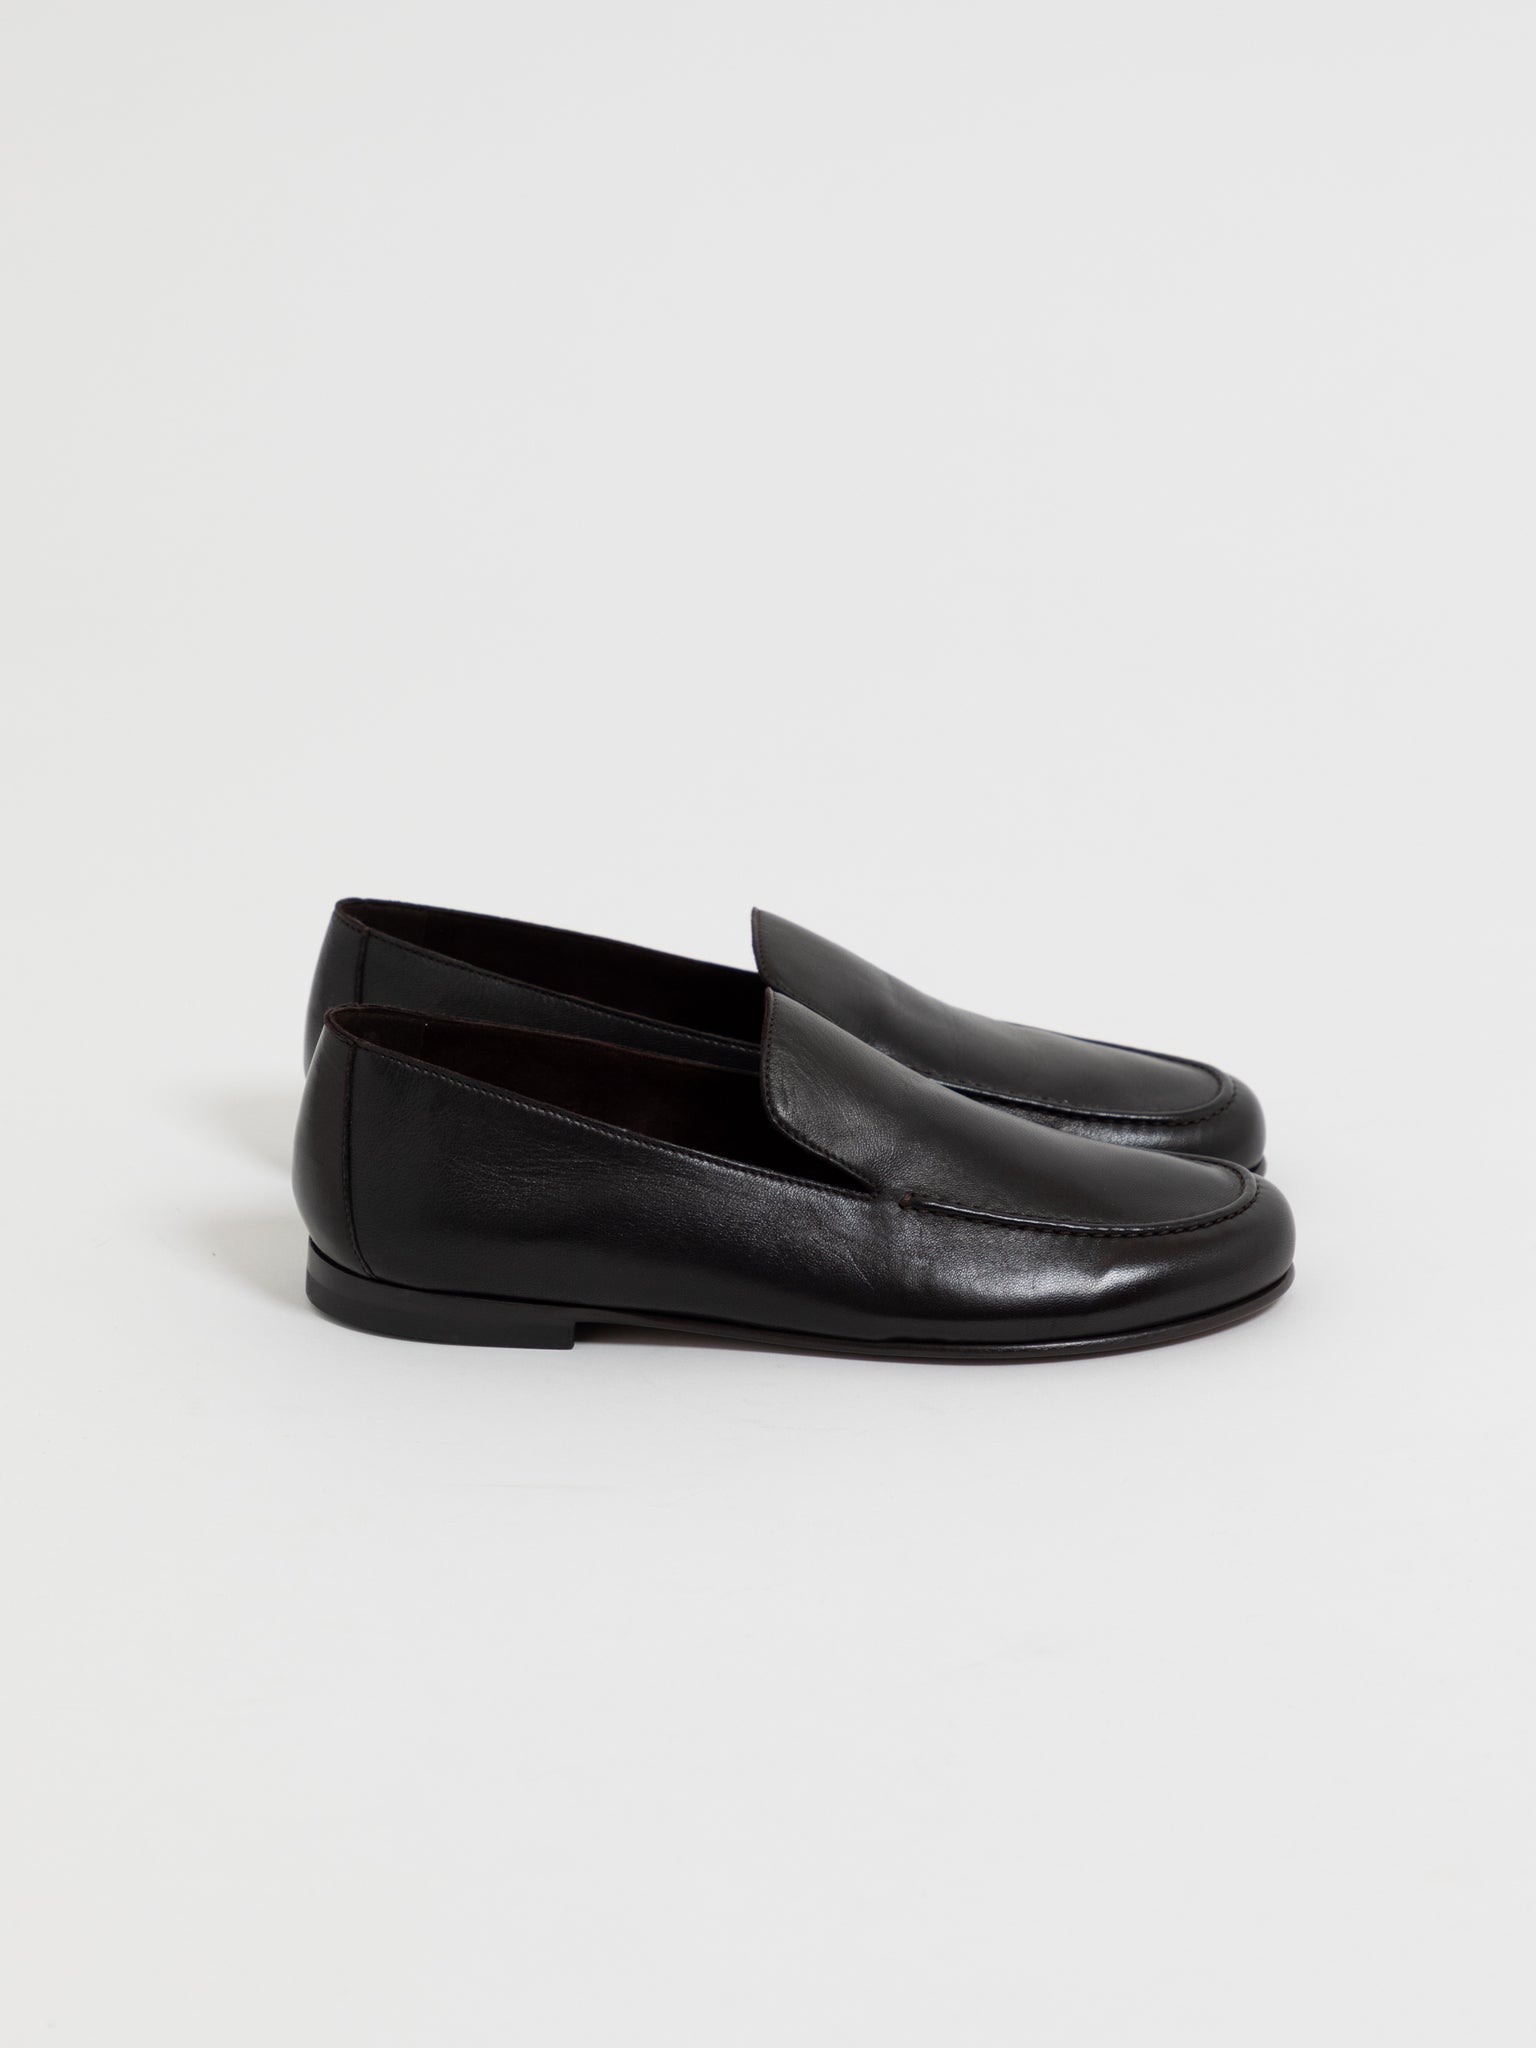 Colette Loafer Chocolate